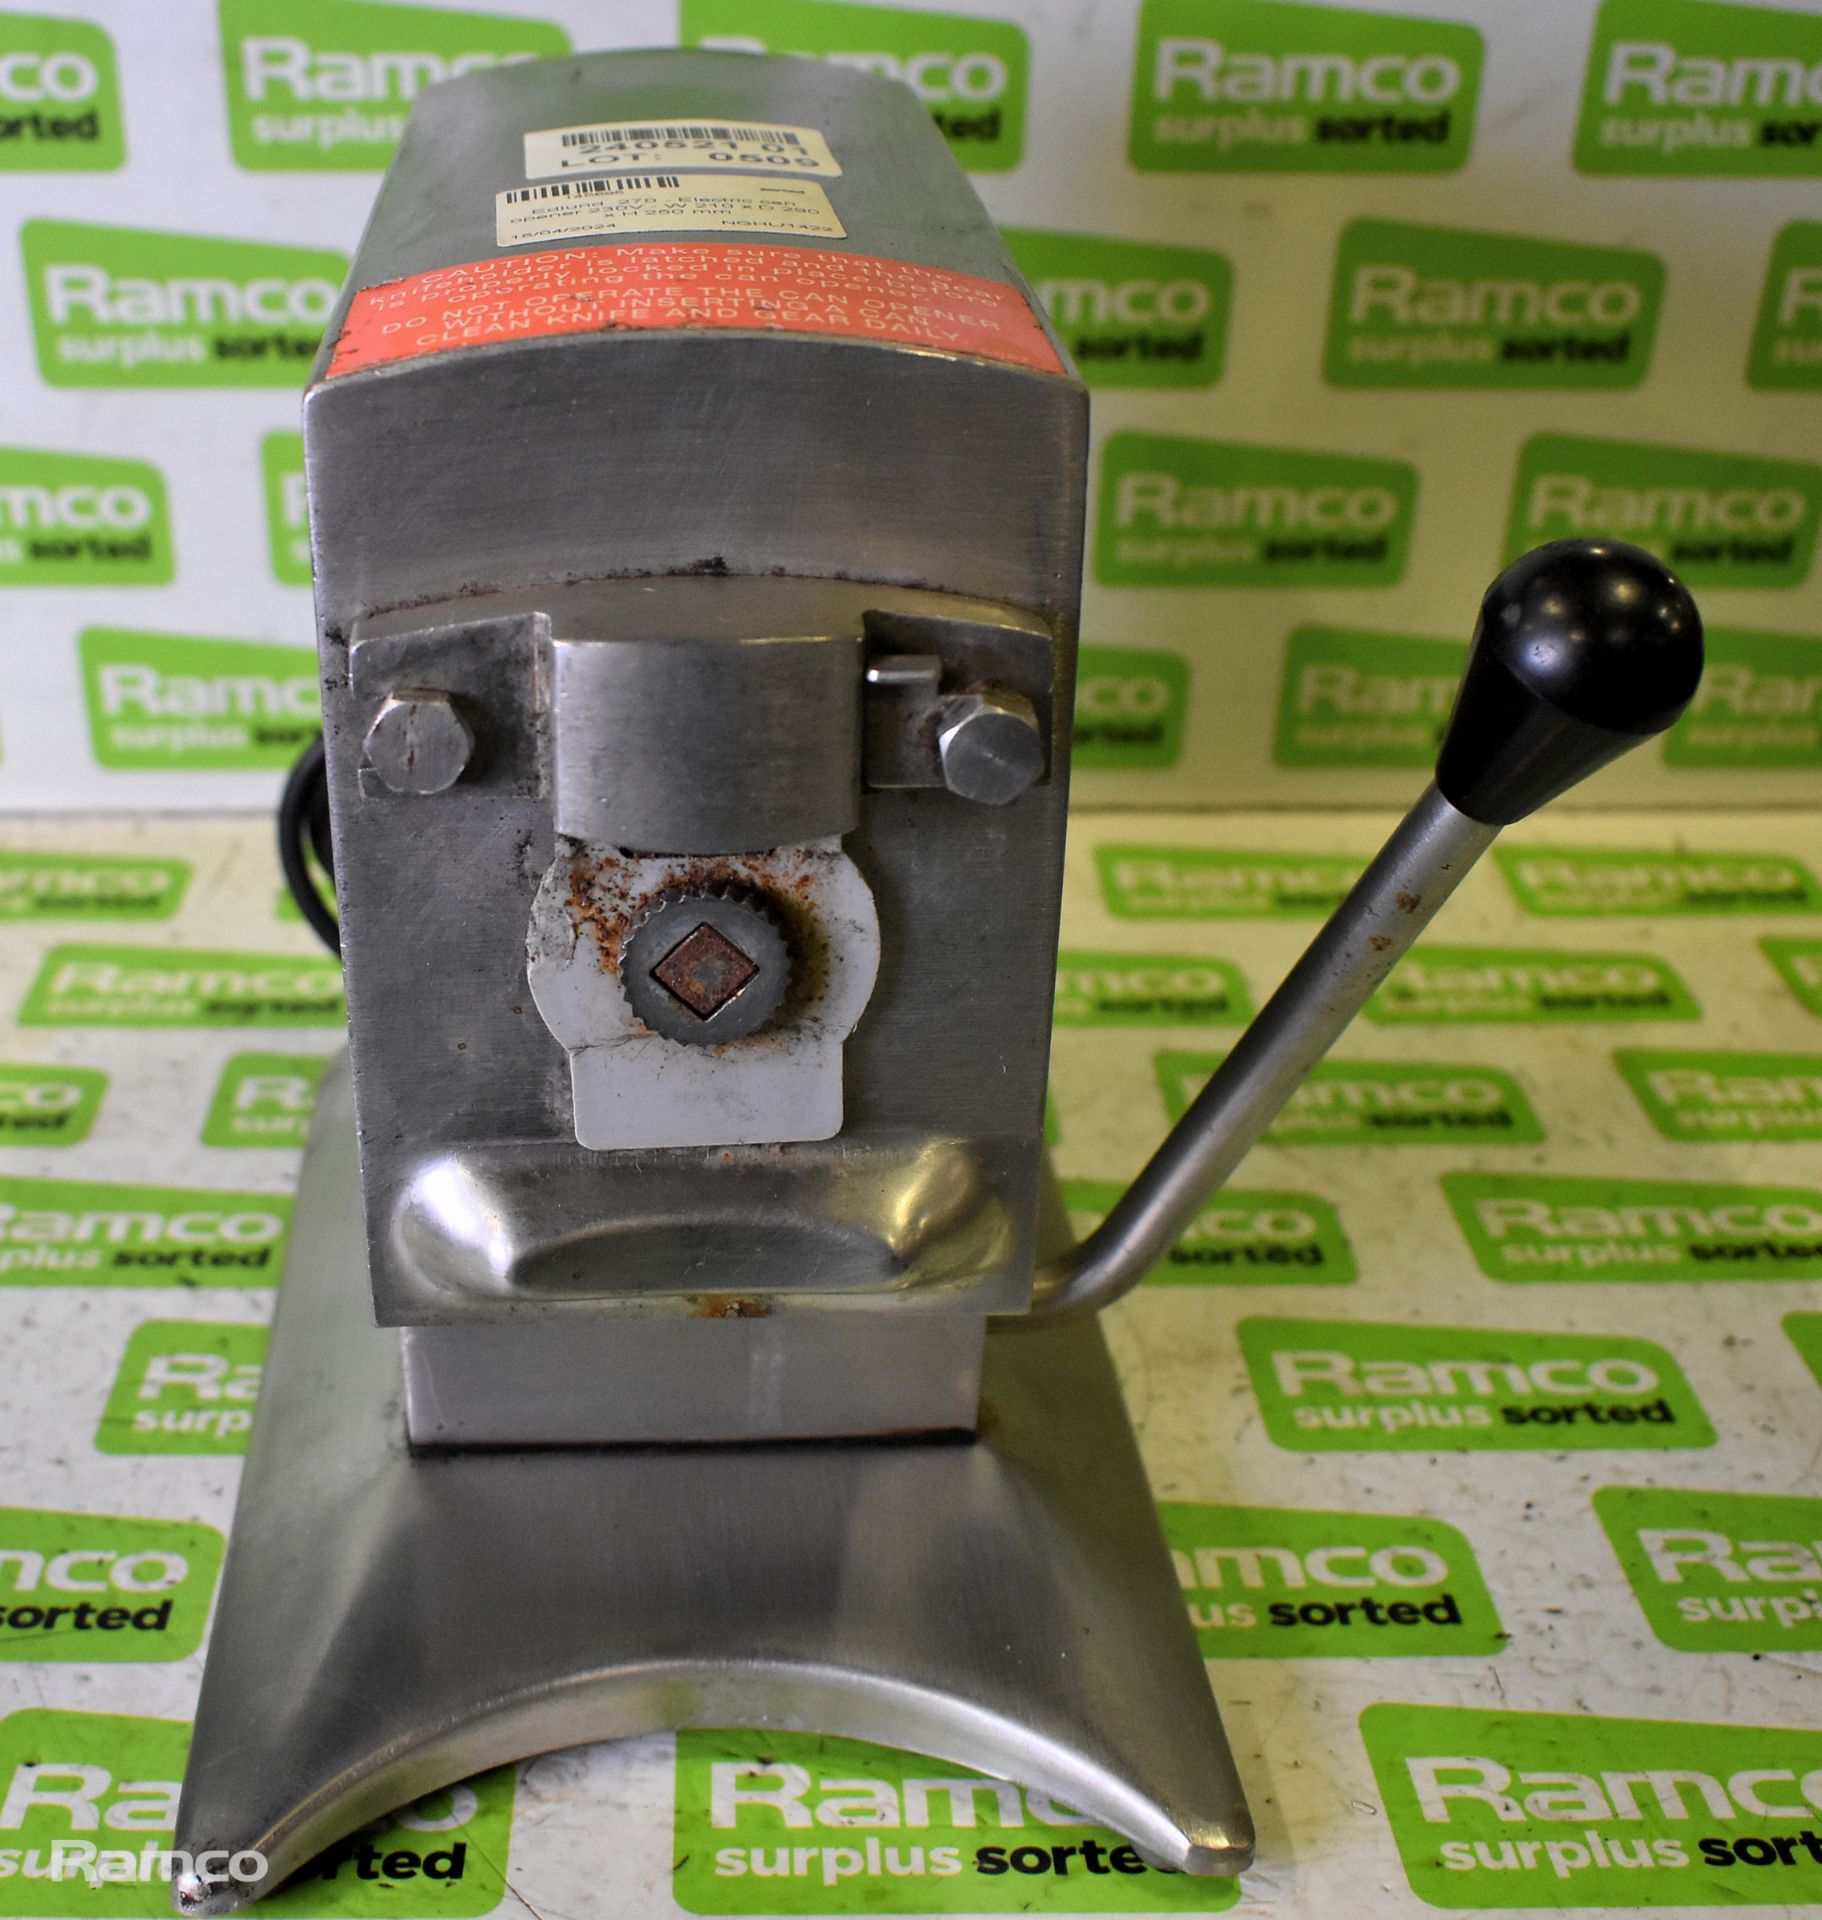 Edlund 270 Electric can opener - 230V - W 210 x D 290 x H 250mm - Image 2 of 5